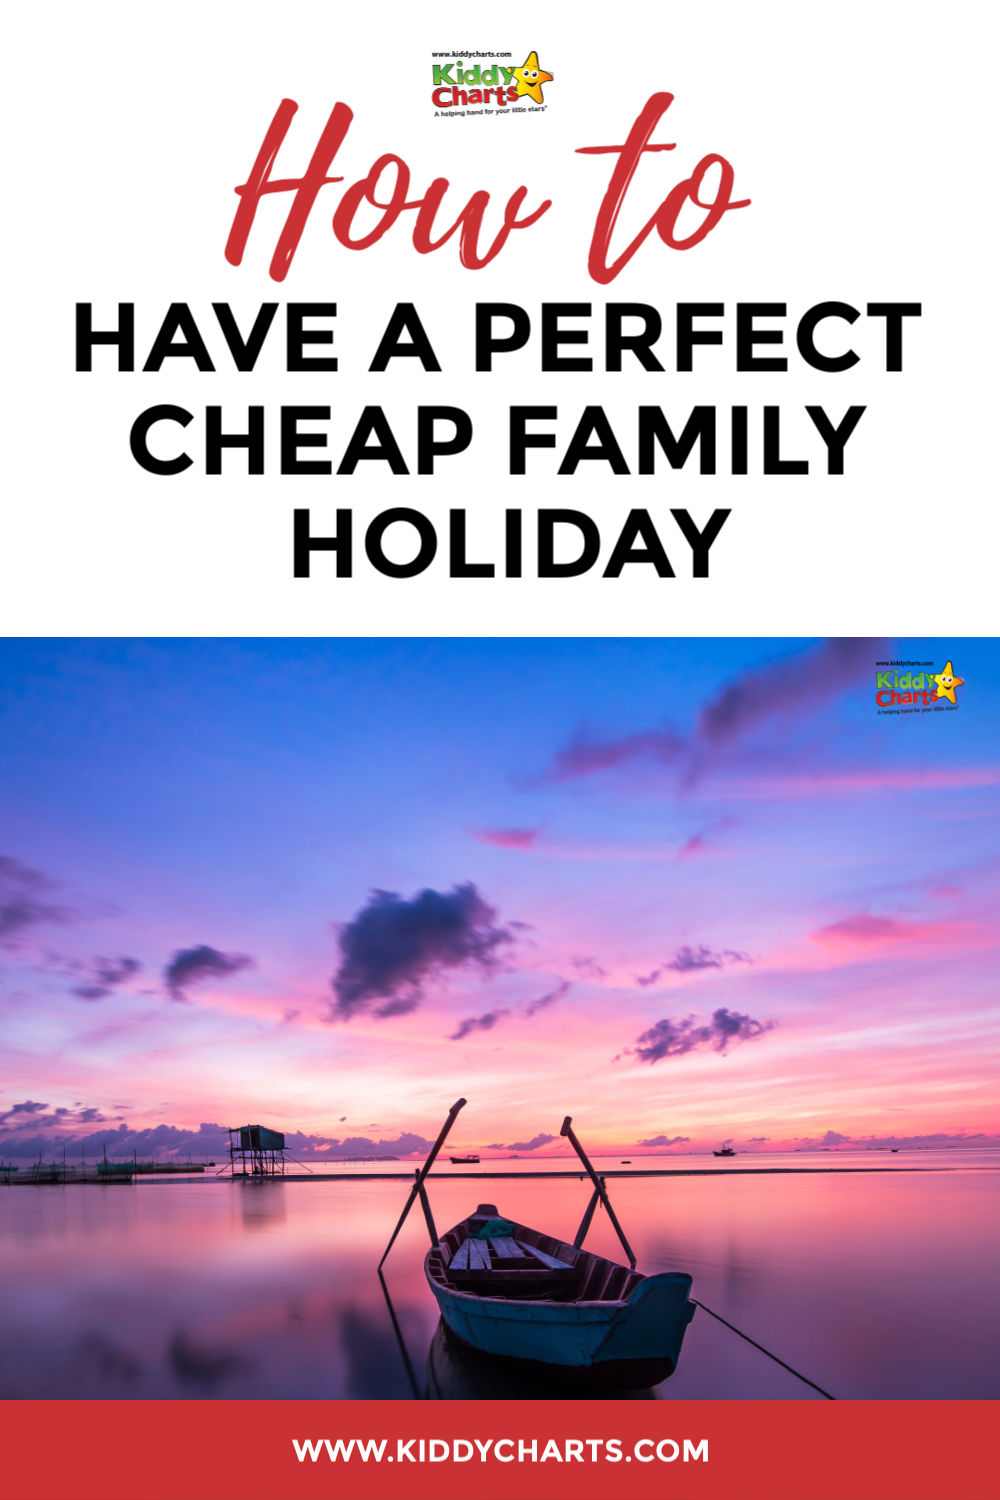 How to have a perfect cheap family holiday Our tips